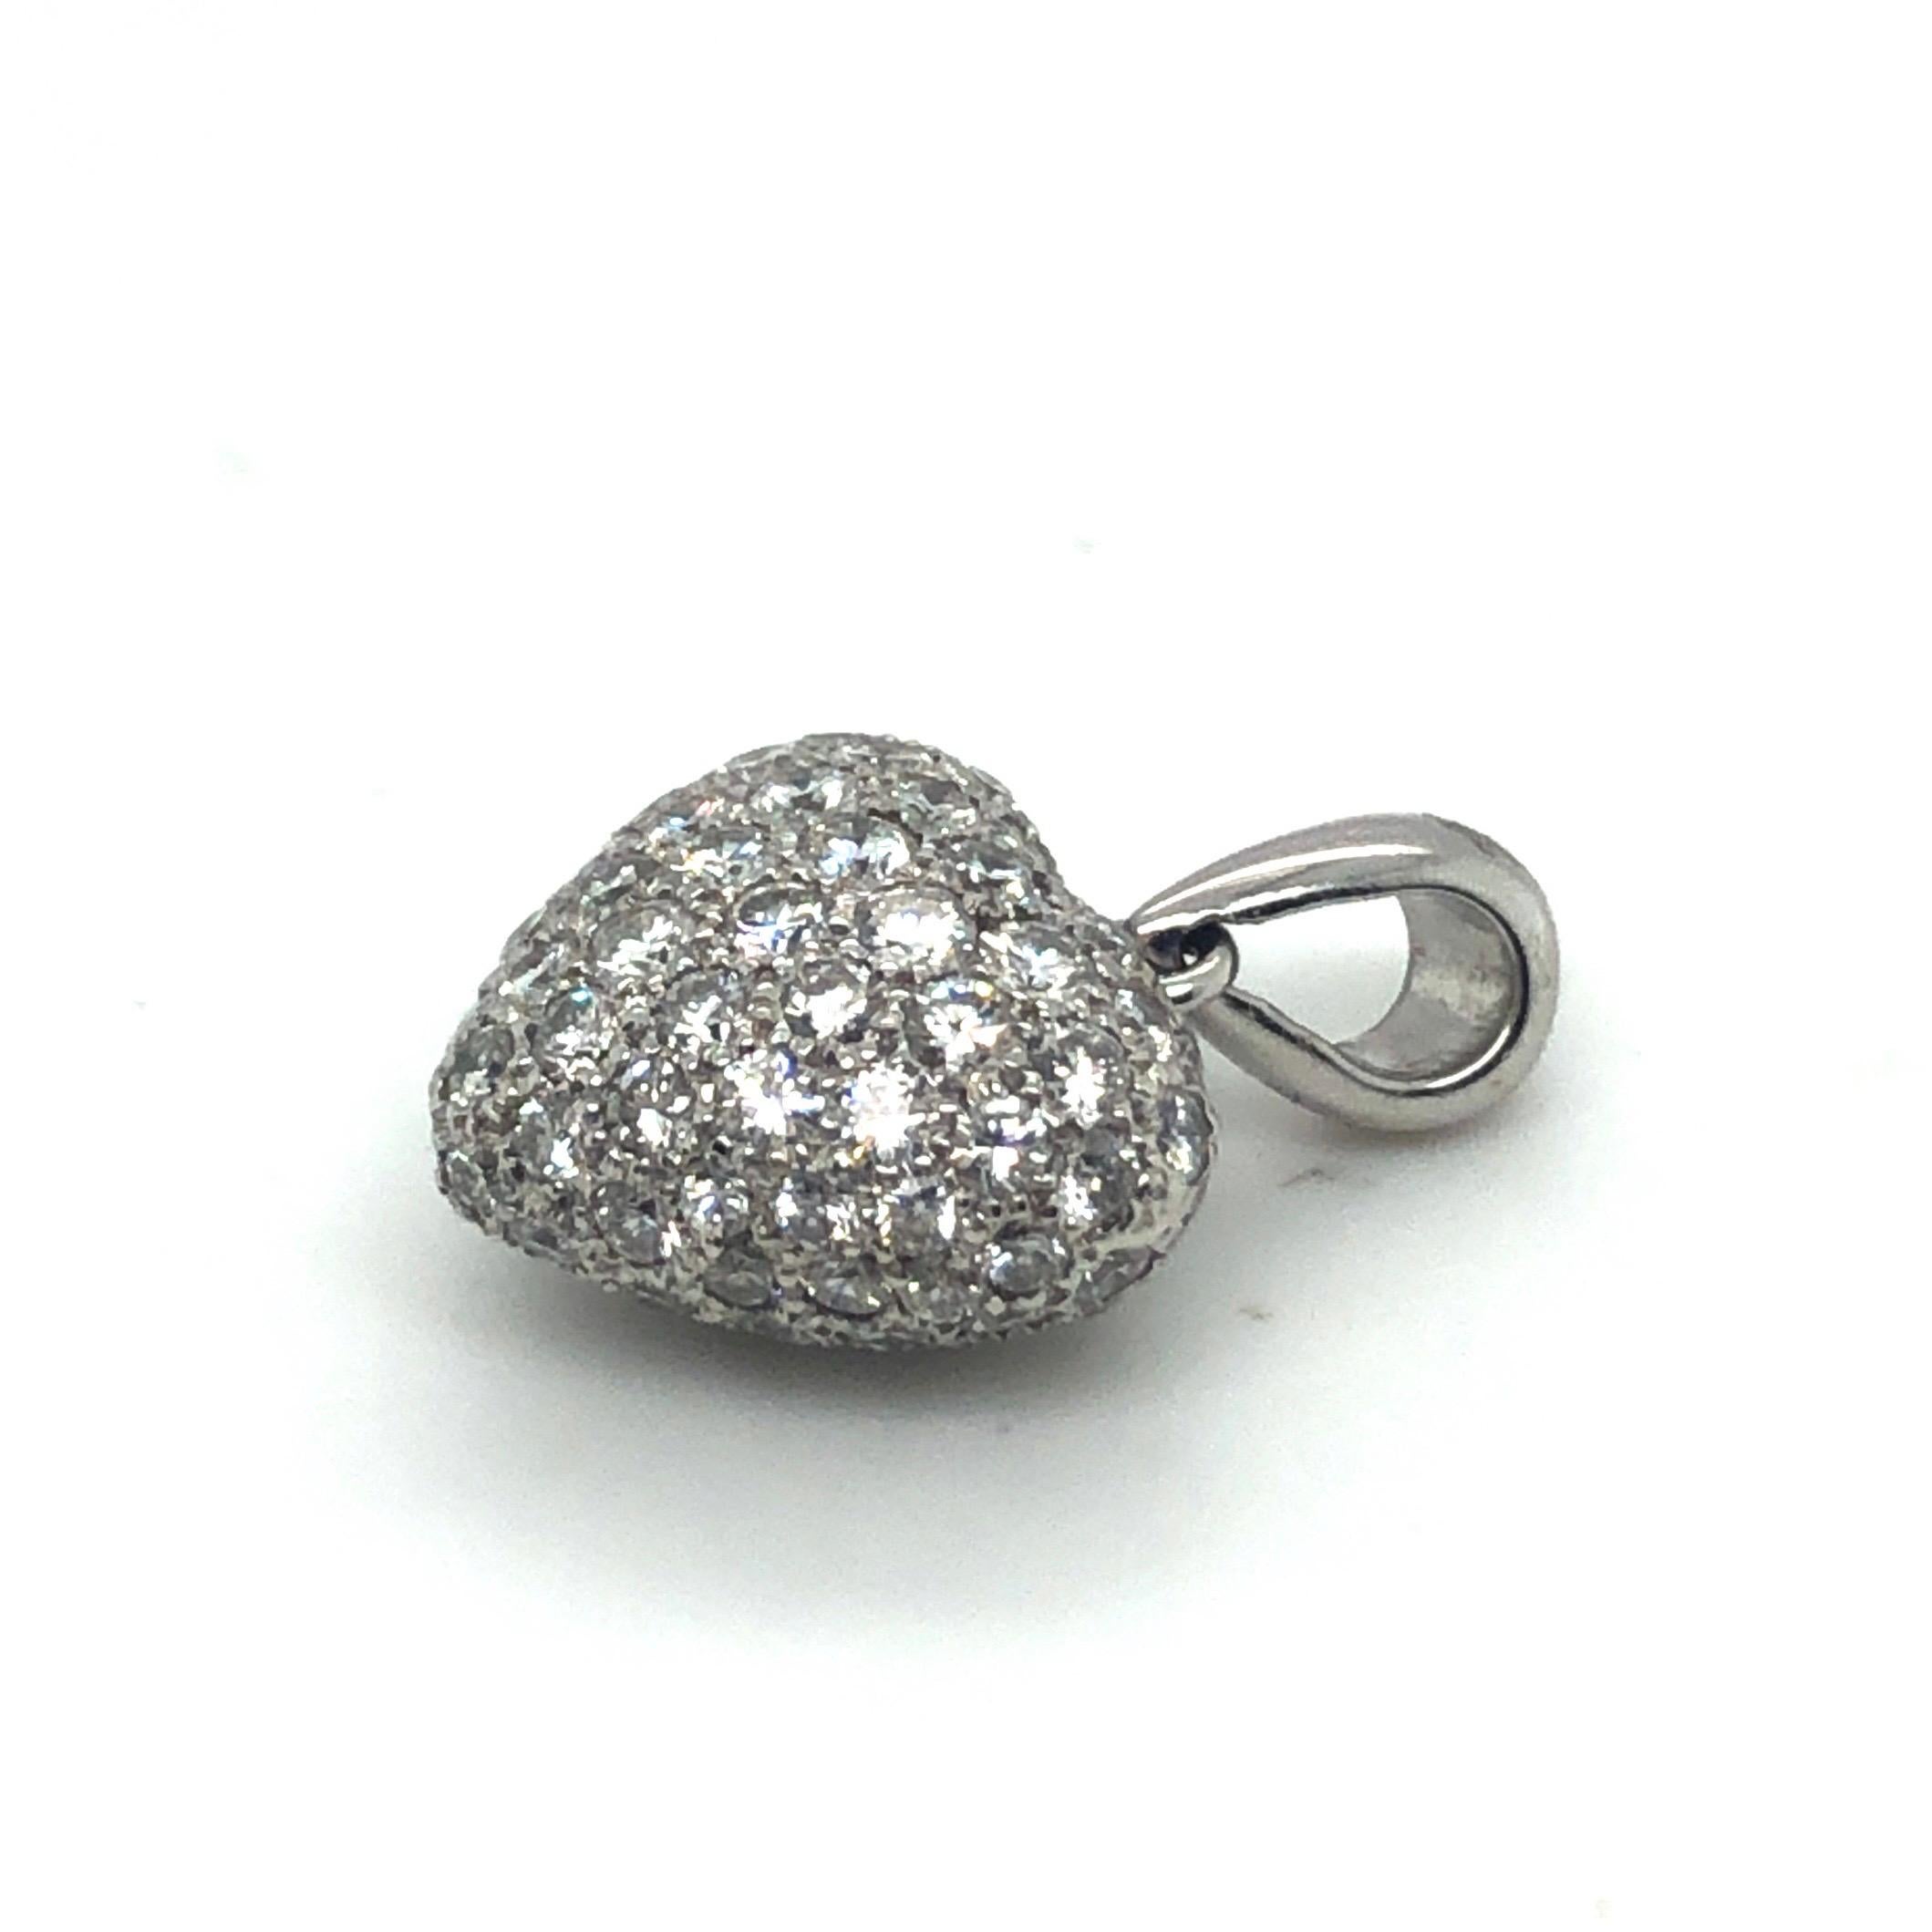 Adorable 18 karat white gold diamond heart-shape pendant/charm.
Crafted in 18 karat white gold and fully pavé-set with 114 brilliant-cut diamonds totalling circa 1.7 carats.
This charm can be added to a fine necklace chain or to a charm bracelet. It